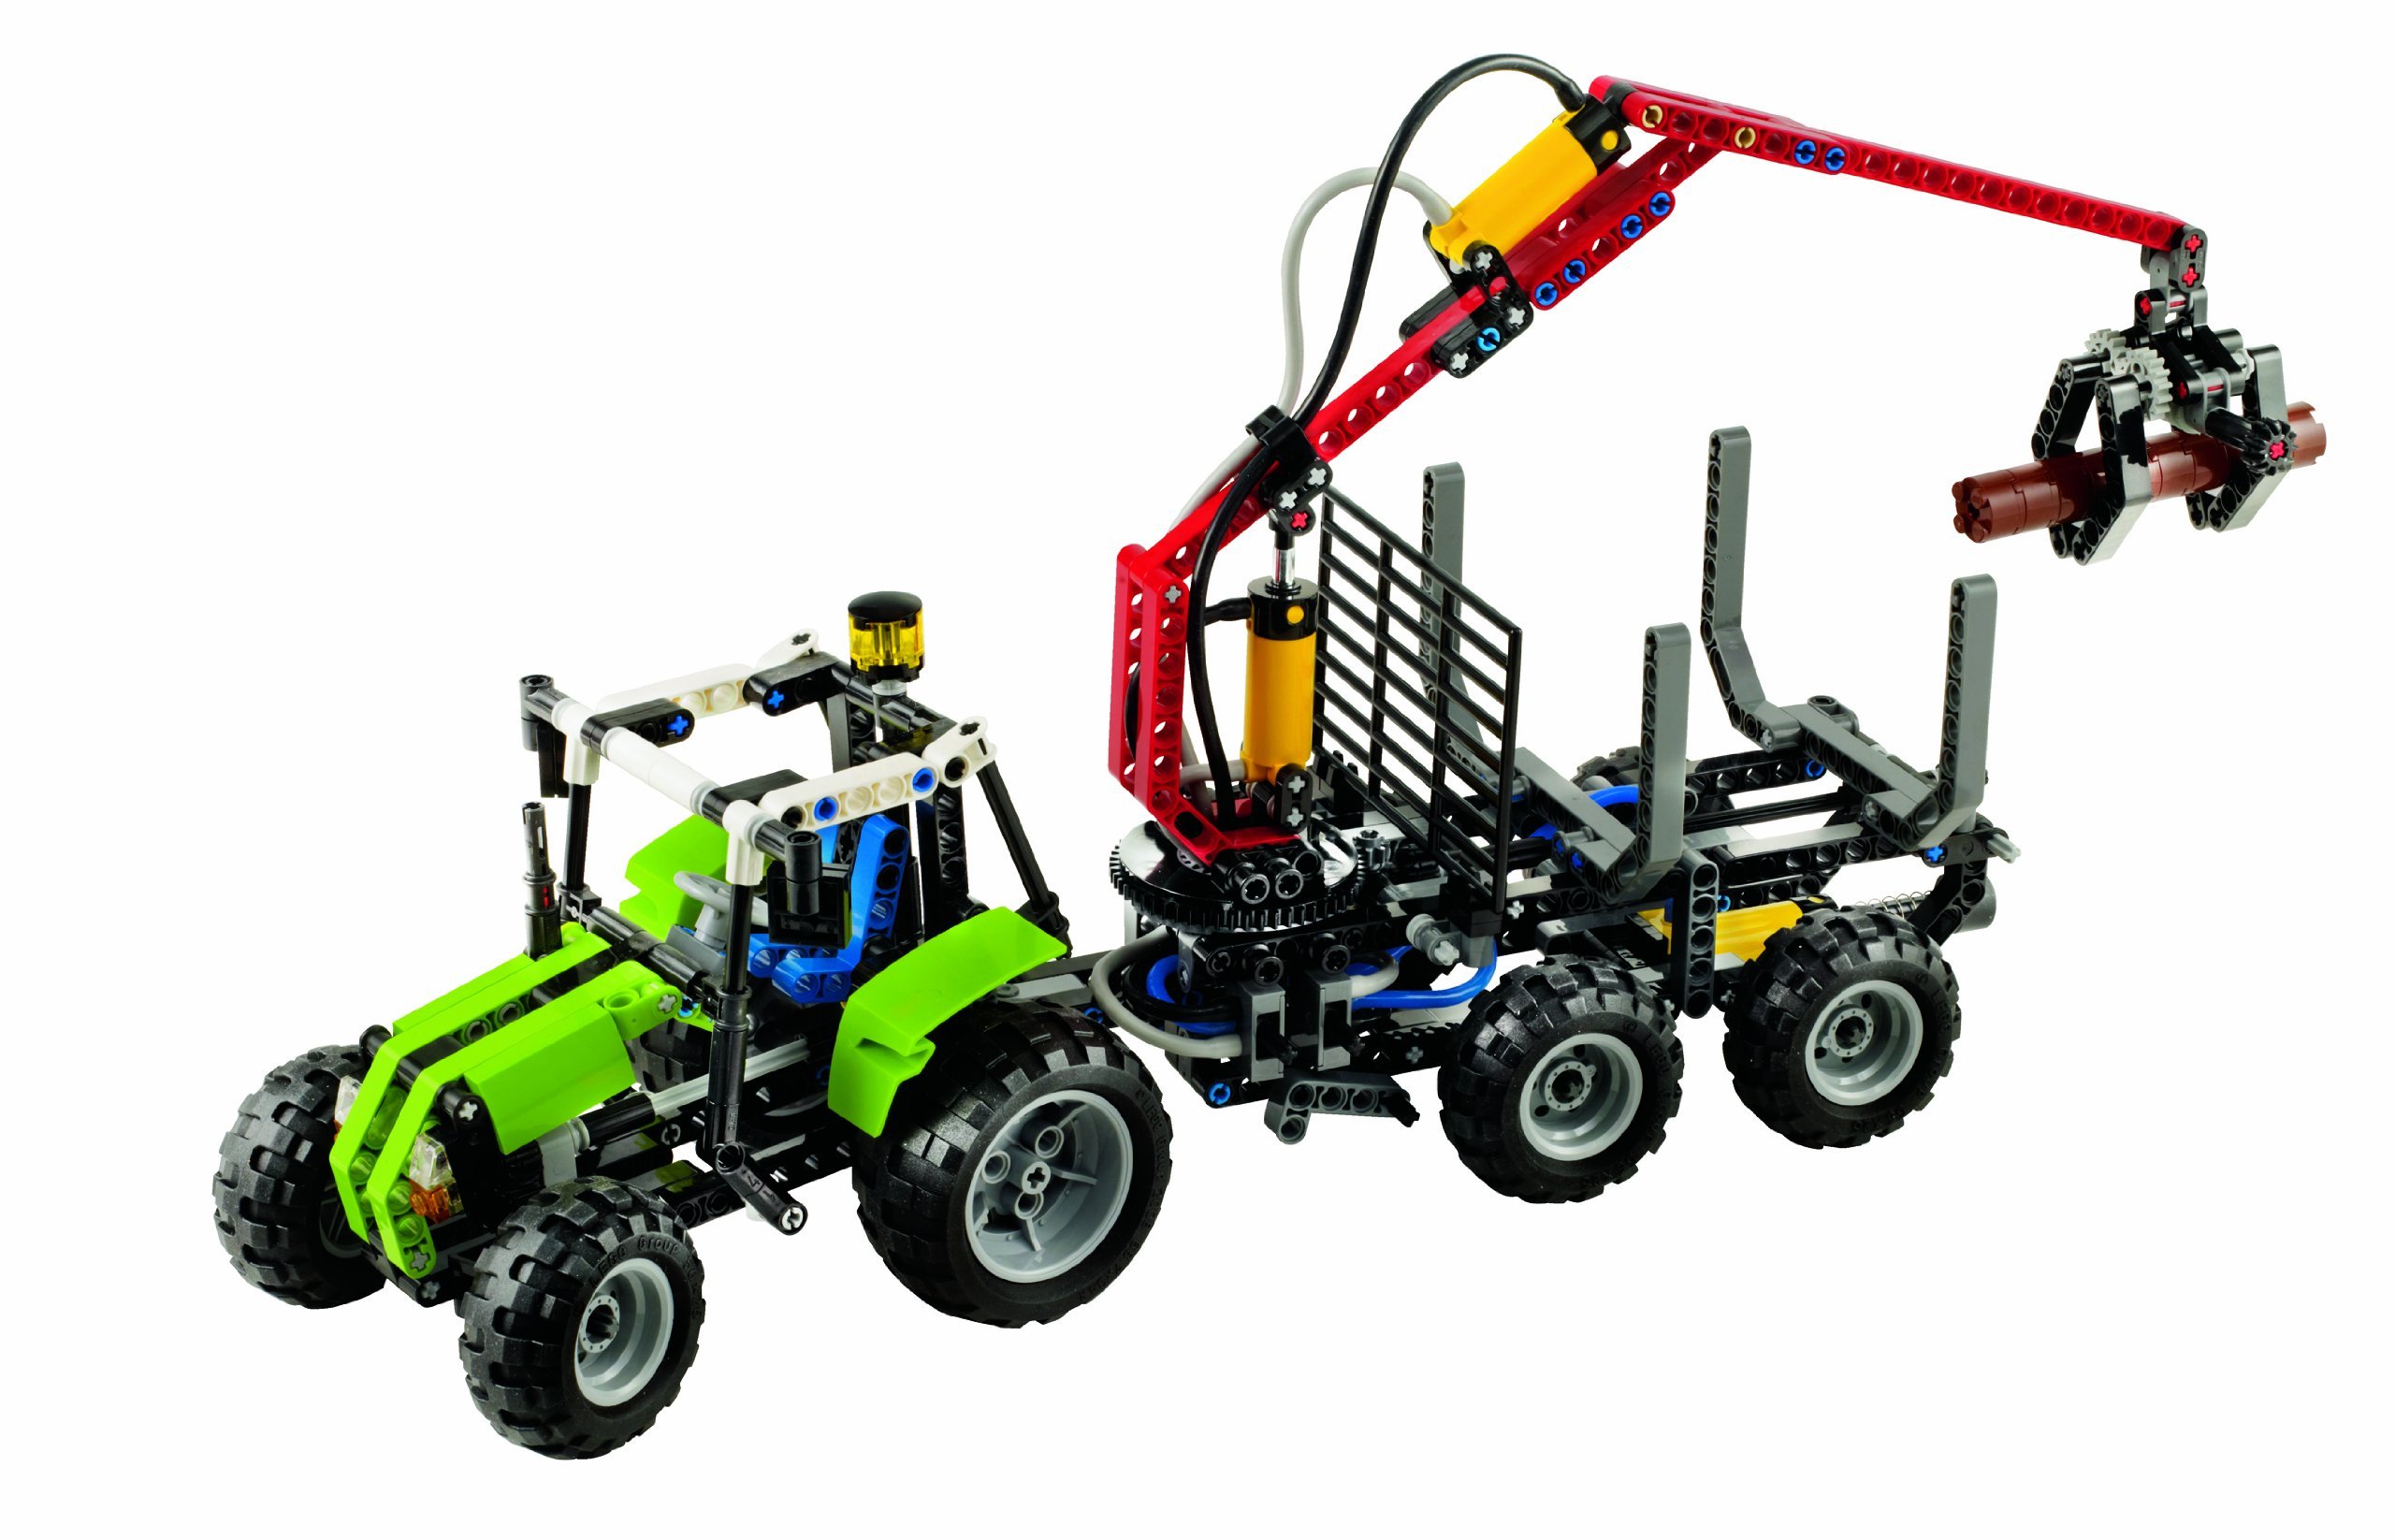 LEGO Technic 8049 Tractor with Forestry Crane